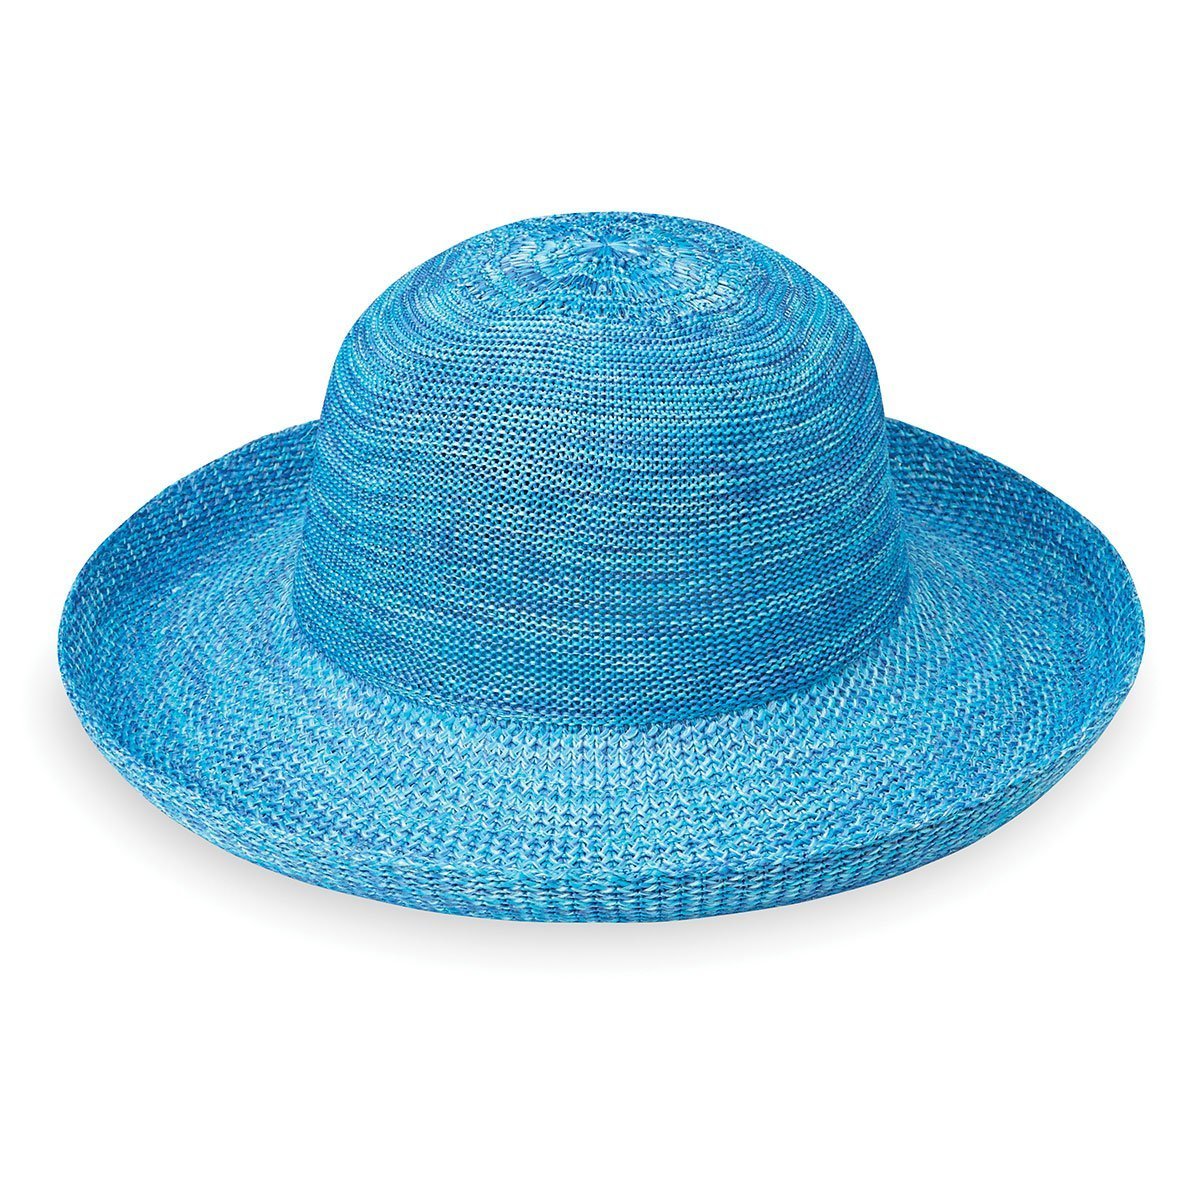 Featuring Women's Packable Big Wide Brim Style Victoria poly straw Sun Hat in Mixed Aqua from Wallaroo